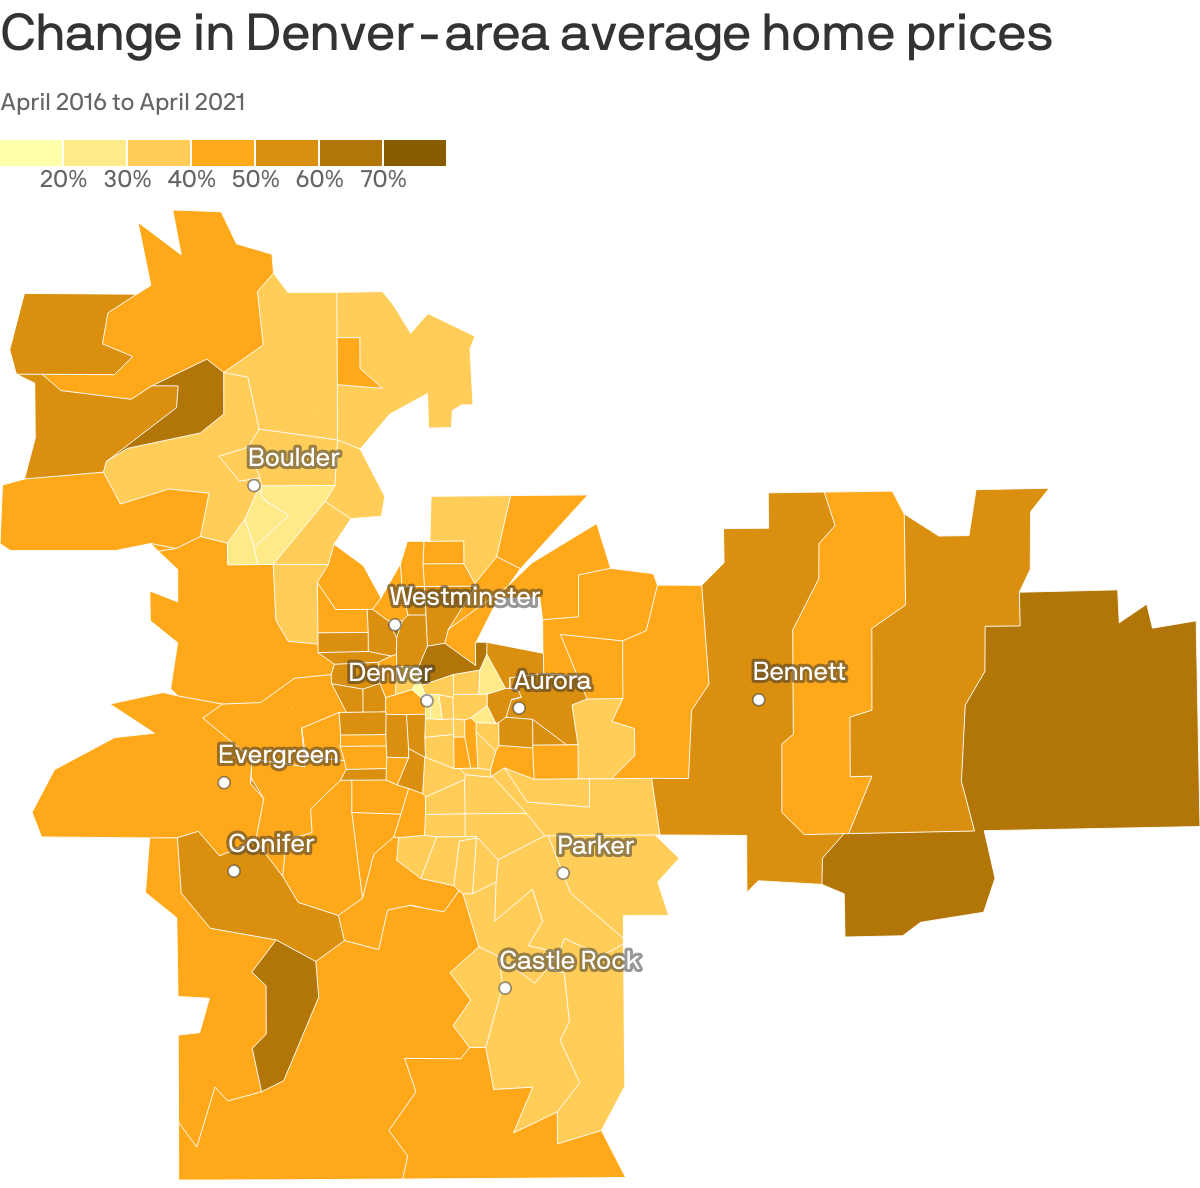 New analysis shows how much Denver area home prices spiked - Axios Denver